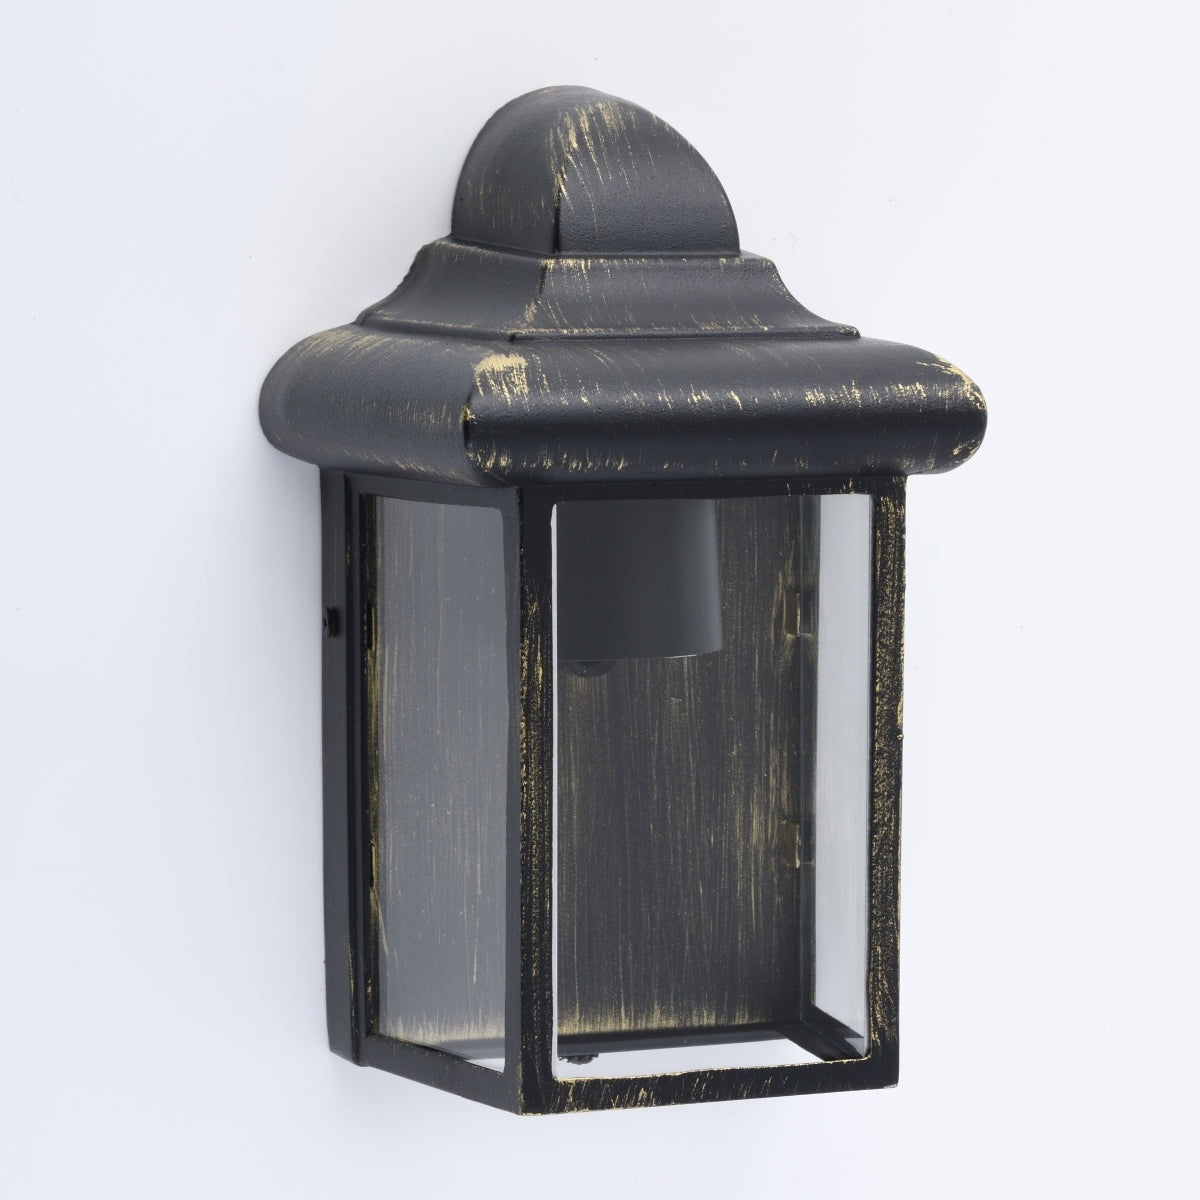 Our Camila wall lantern light is styled with a sophisticated black and bronze colour scheme, allowing the wall light to fit into any home’s style. What’s more, the lantern’s design is a modern take on a traditional styled wall light, creating a flexible look for interior and exterior use.&nbsp;